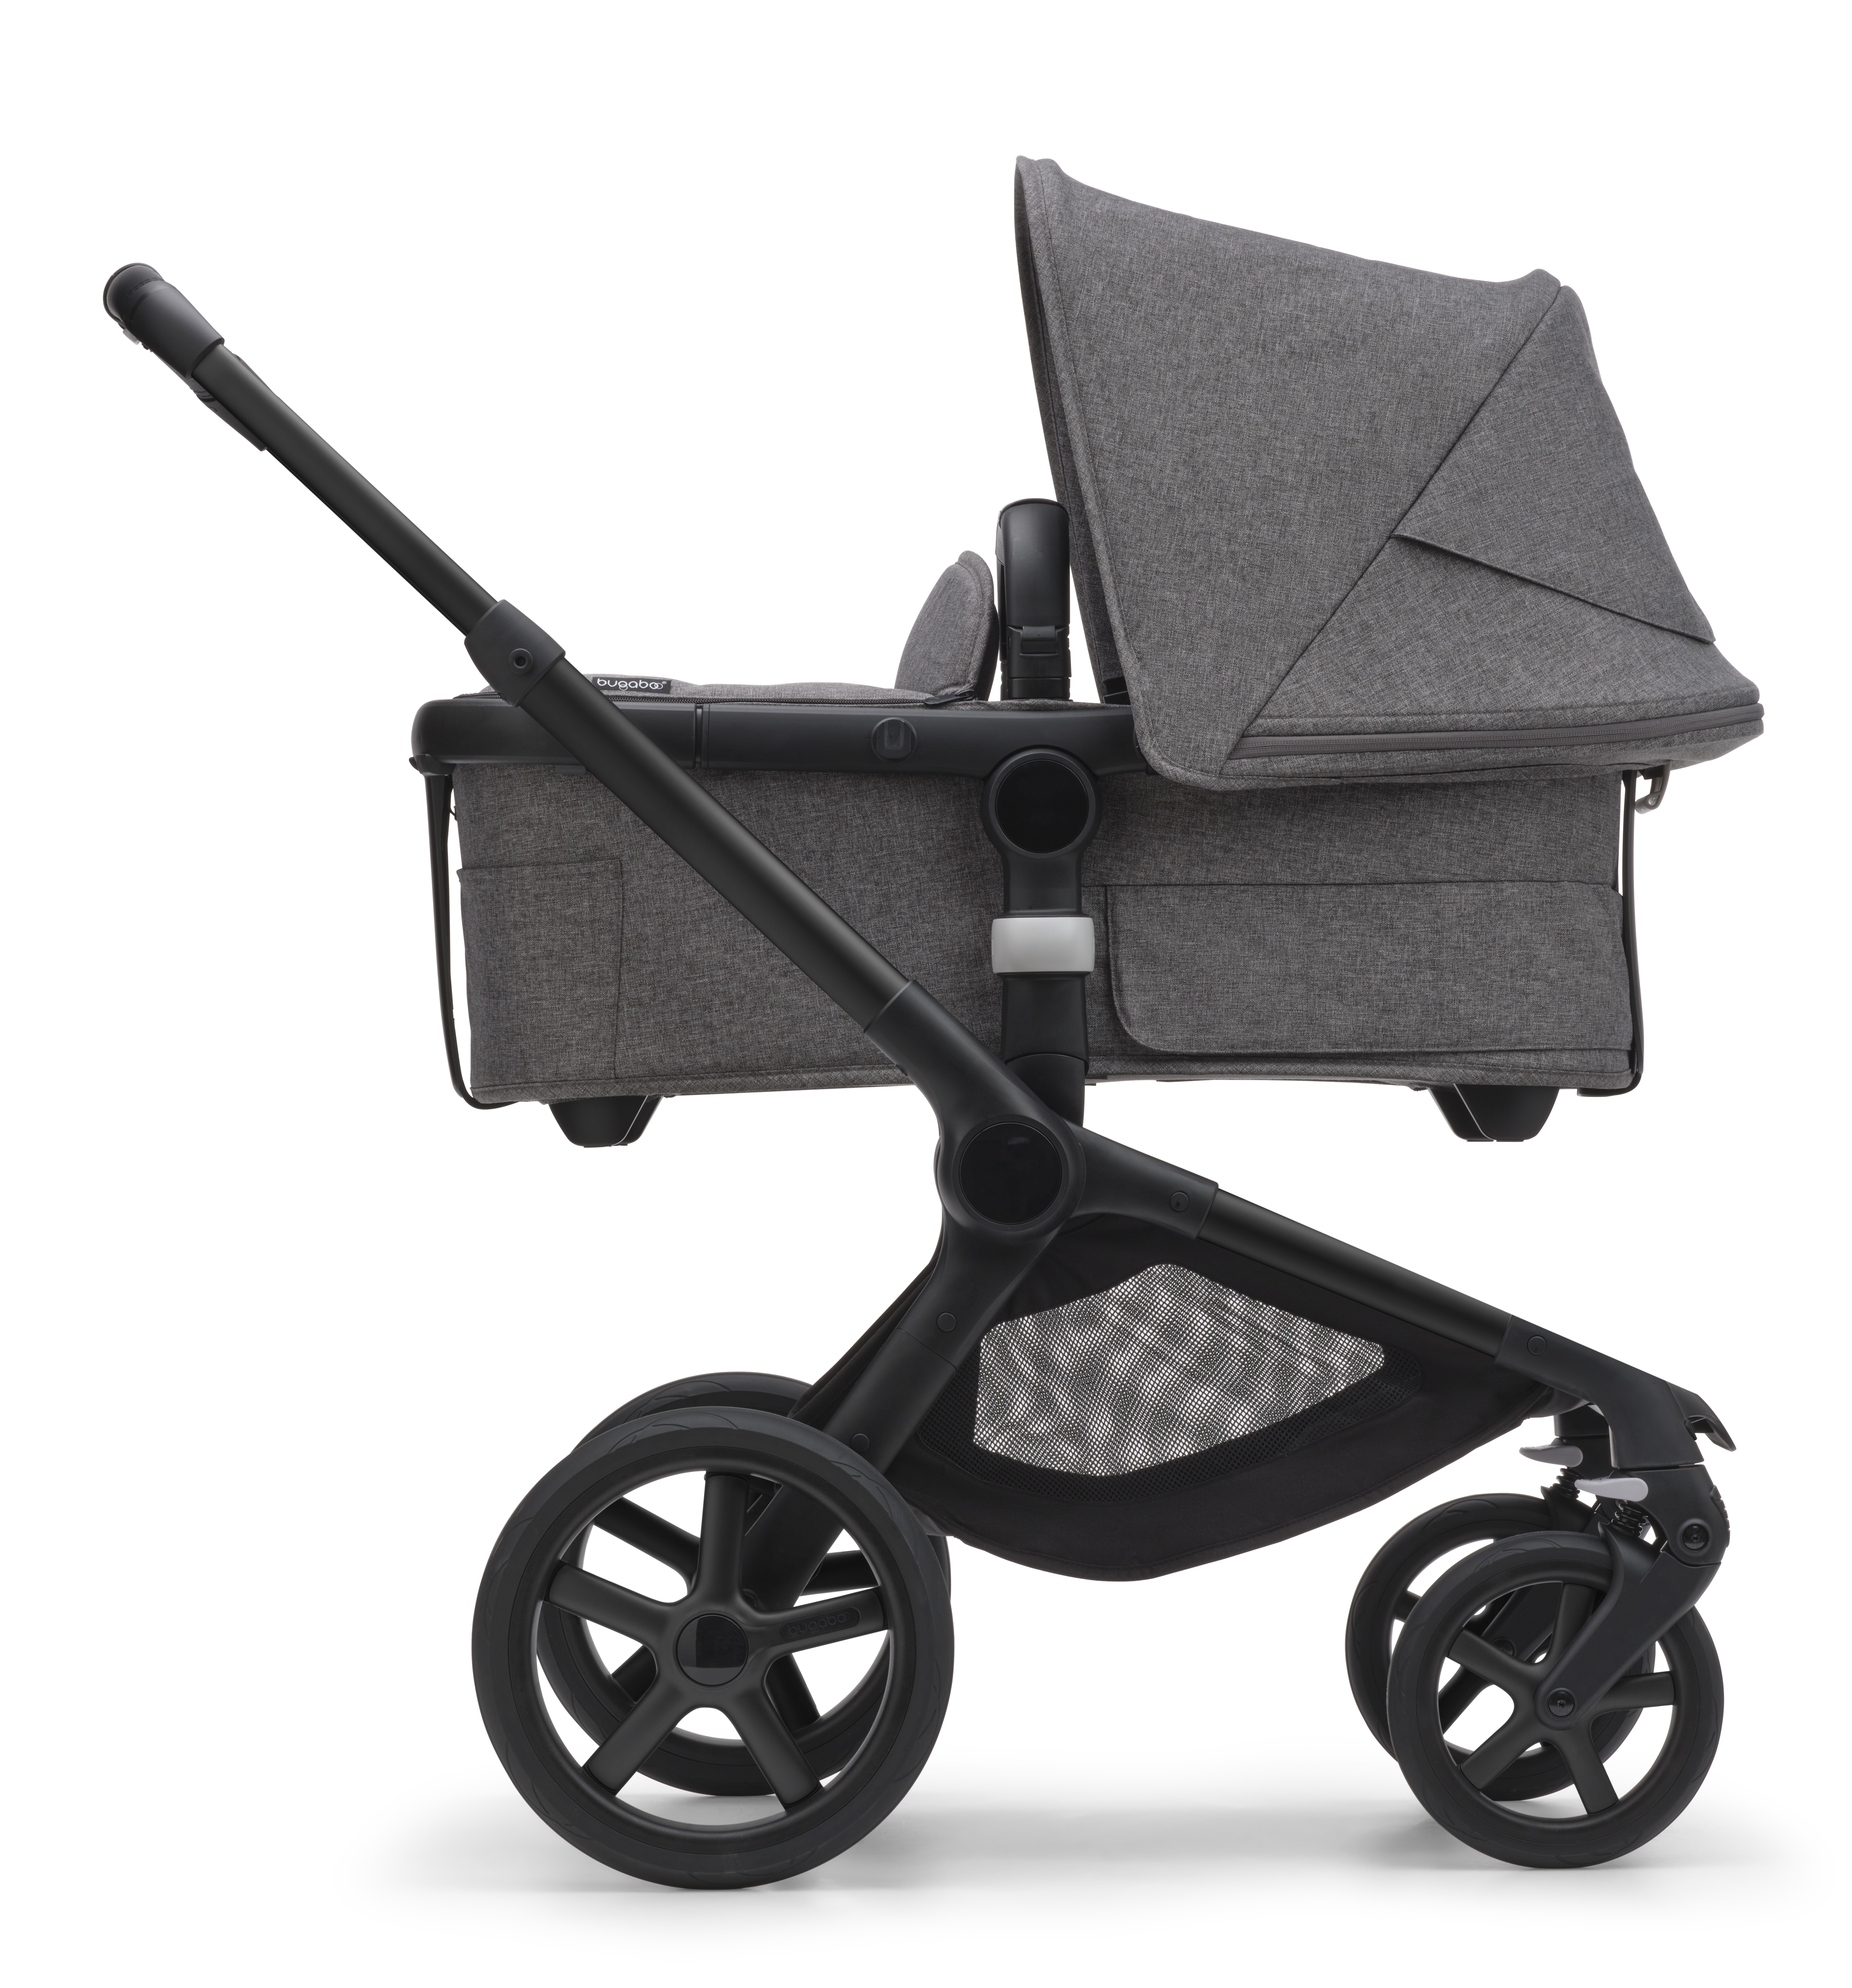 Bugaboo launches the new Bugaboo Fox 5